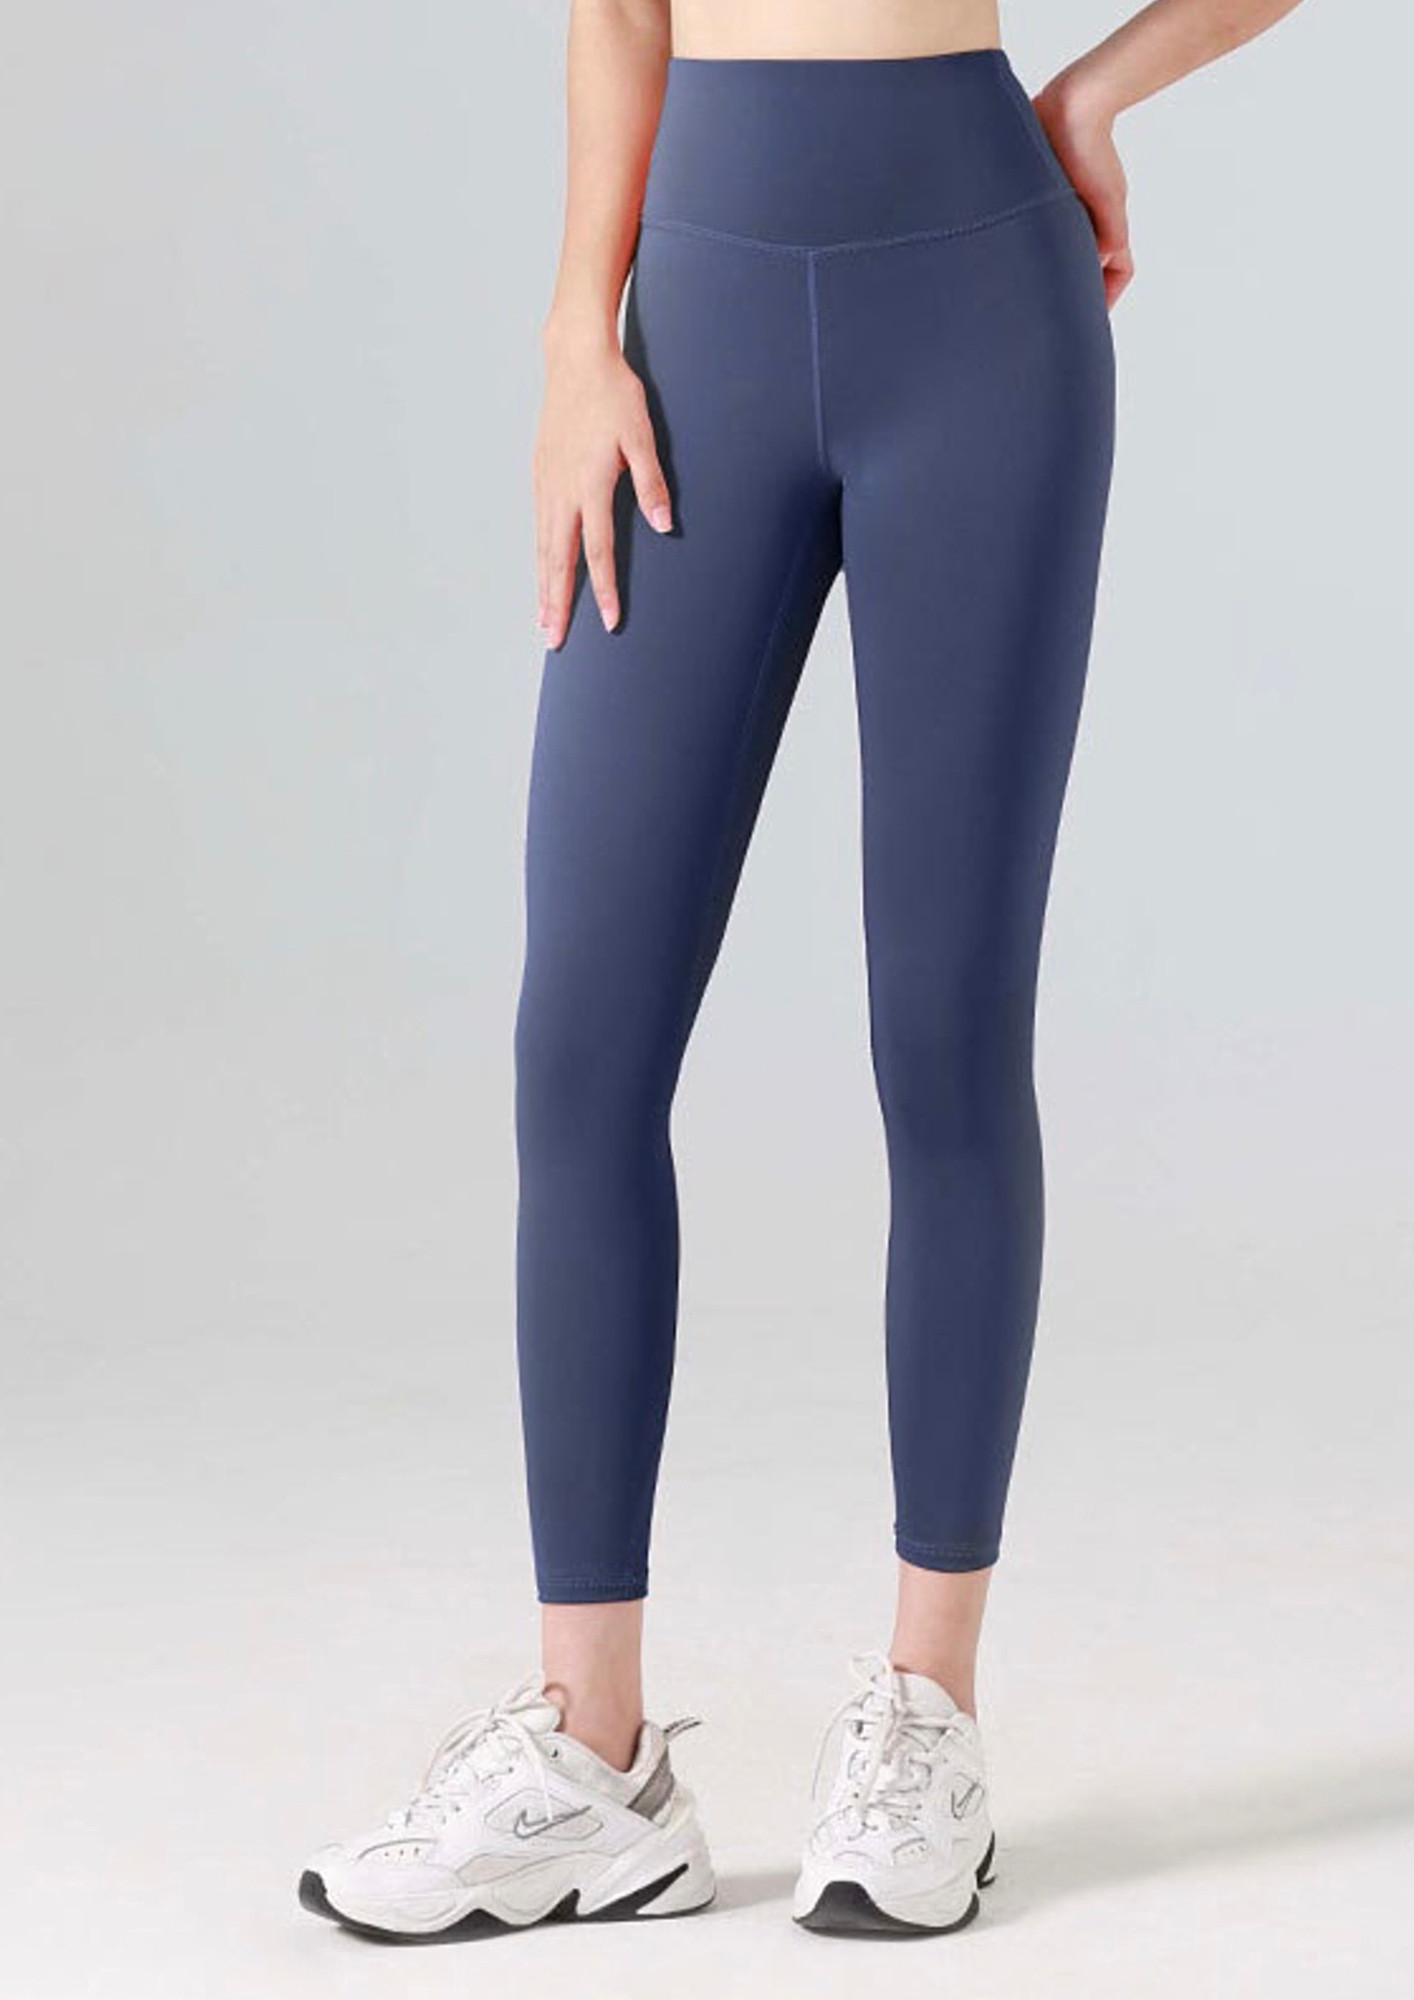 The 9 Best Yoga Pants You Should Consider Buying in 2022